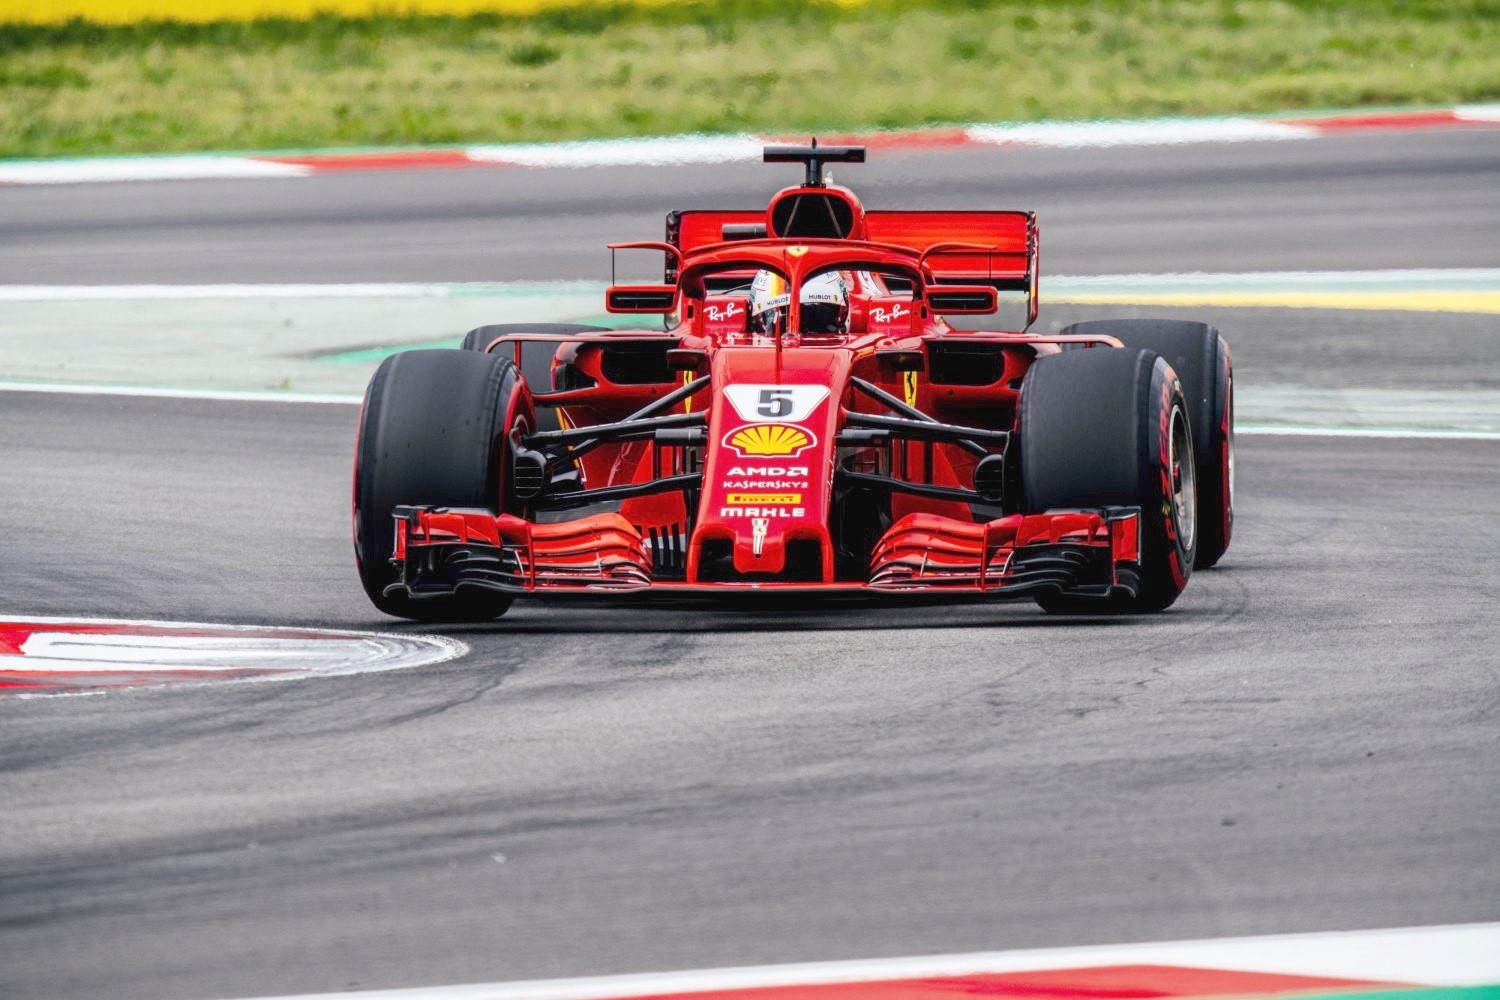 Ferrari had to run a radical setup in Spain to keep pace with Mercedes. It was still too slow and Vettel's tires wore out quickly